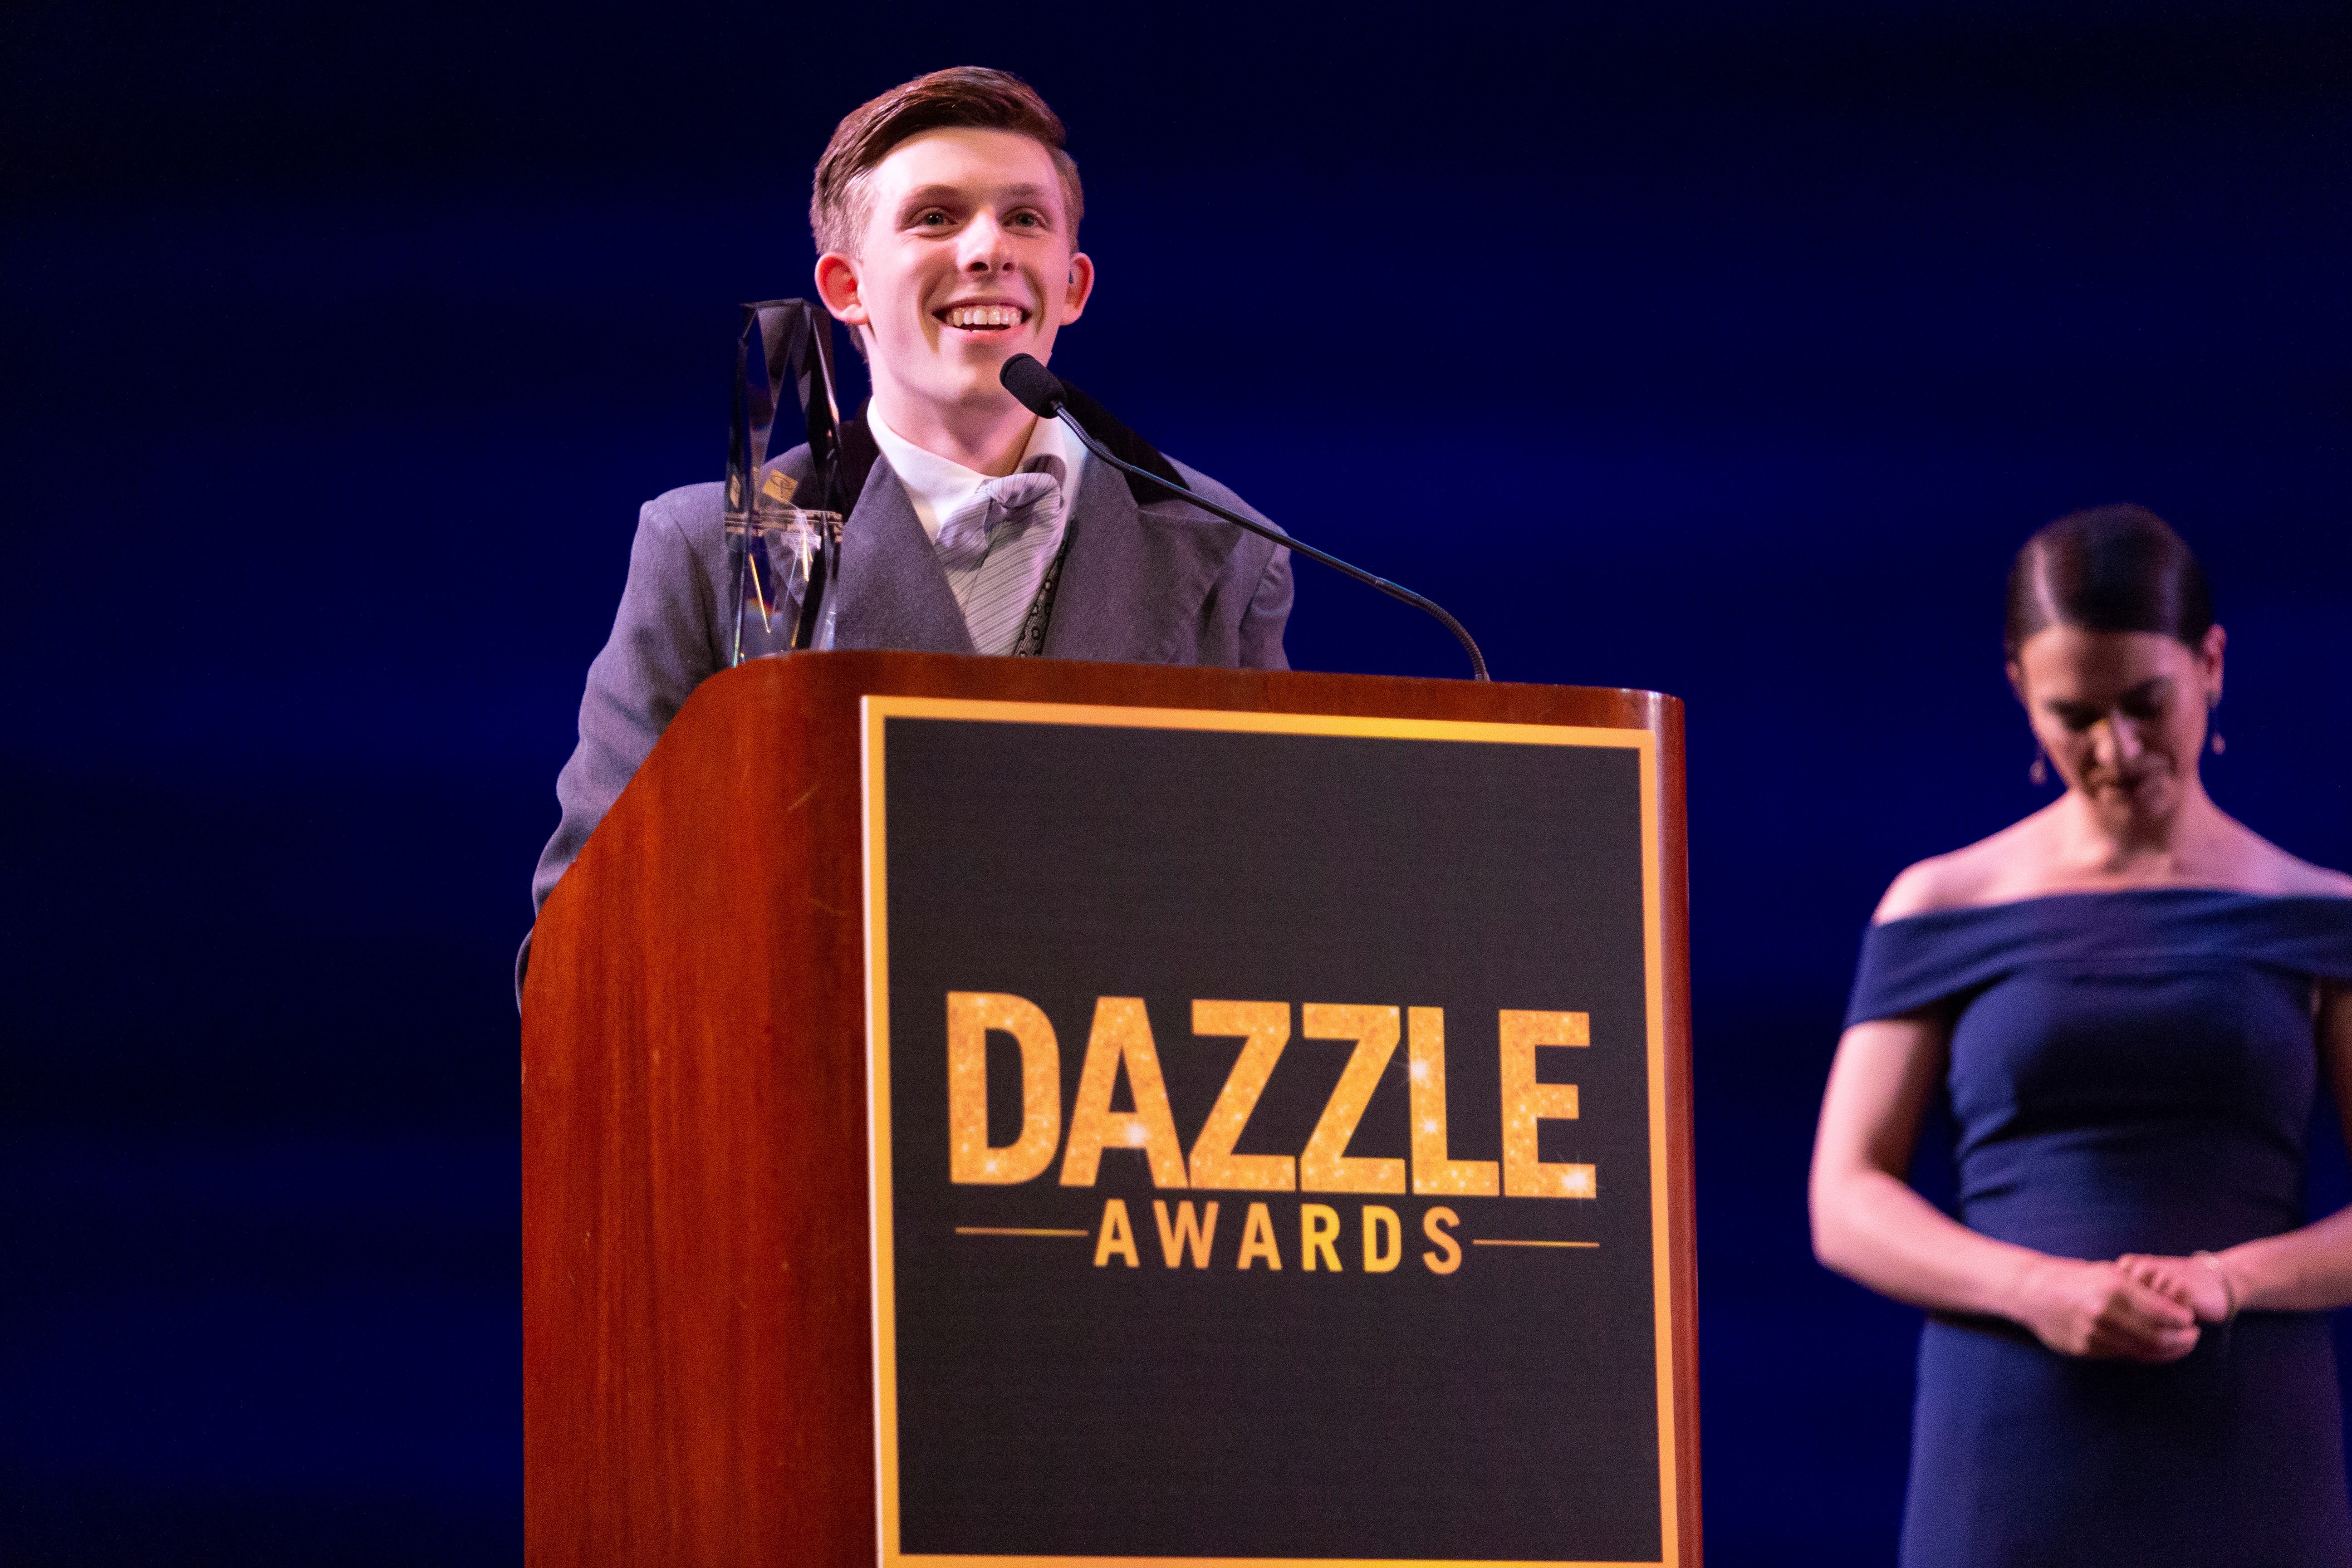 J.R. Heckman accepting an award at the Dazzle Awards ceremony